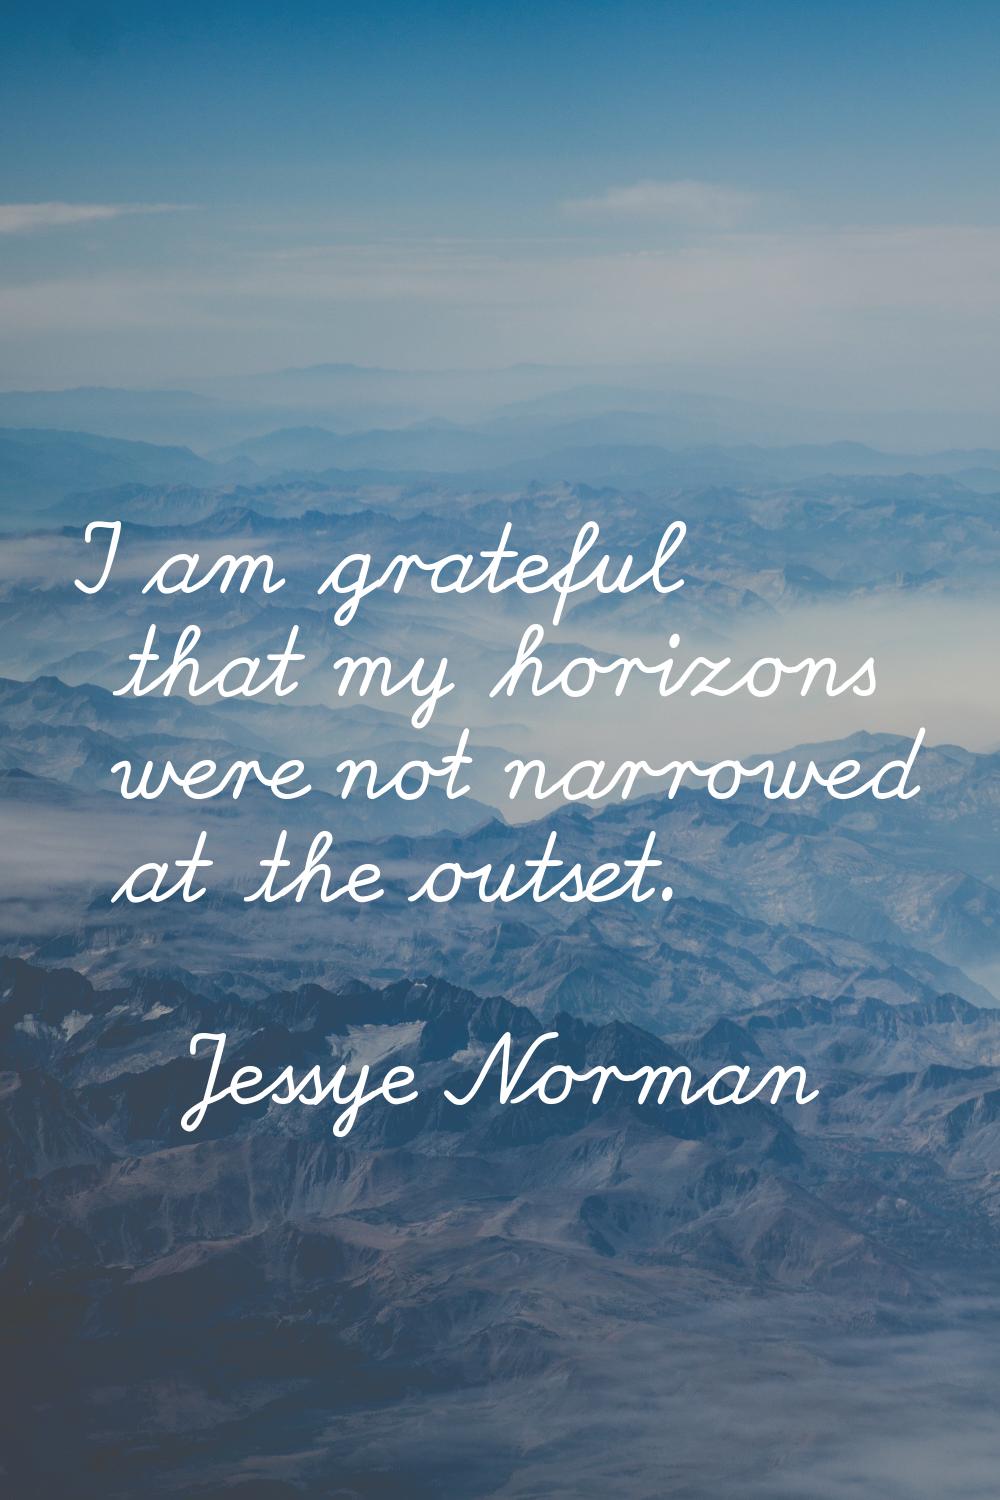 I am grateful that my horizons were not narrowed at the outset.